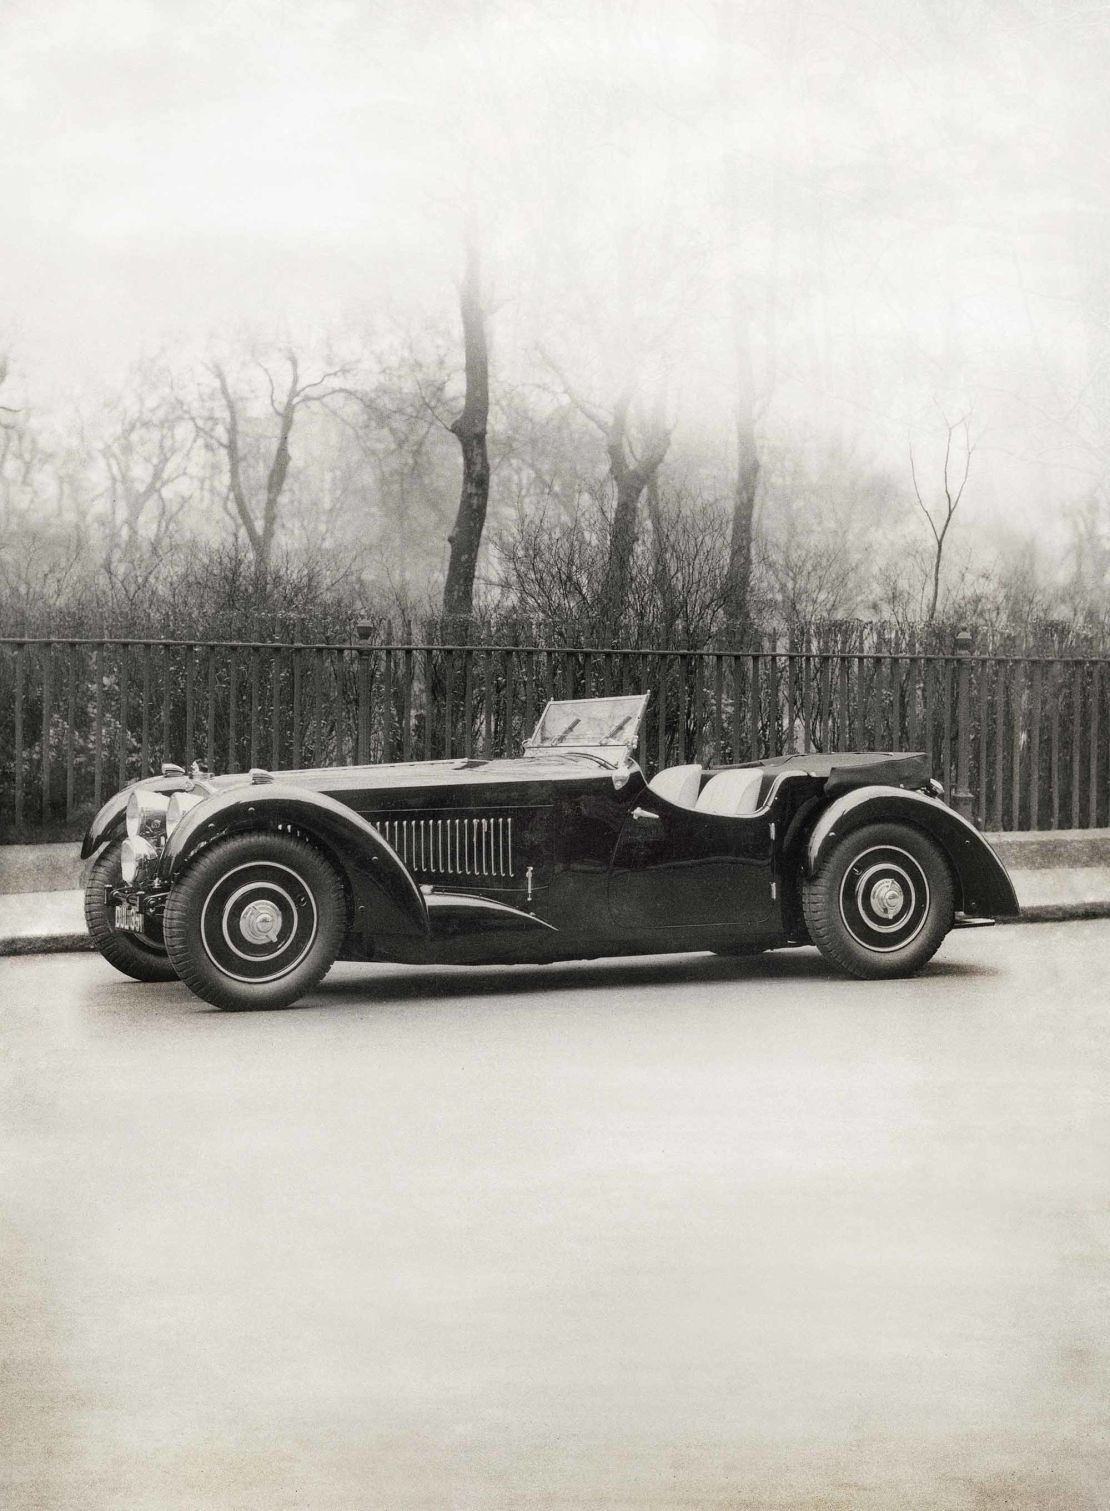 The Bugatti Type 57S, pictured here circa 1937, is estimated to fetch a price tag of up to $9.5 million at auction next month.